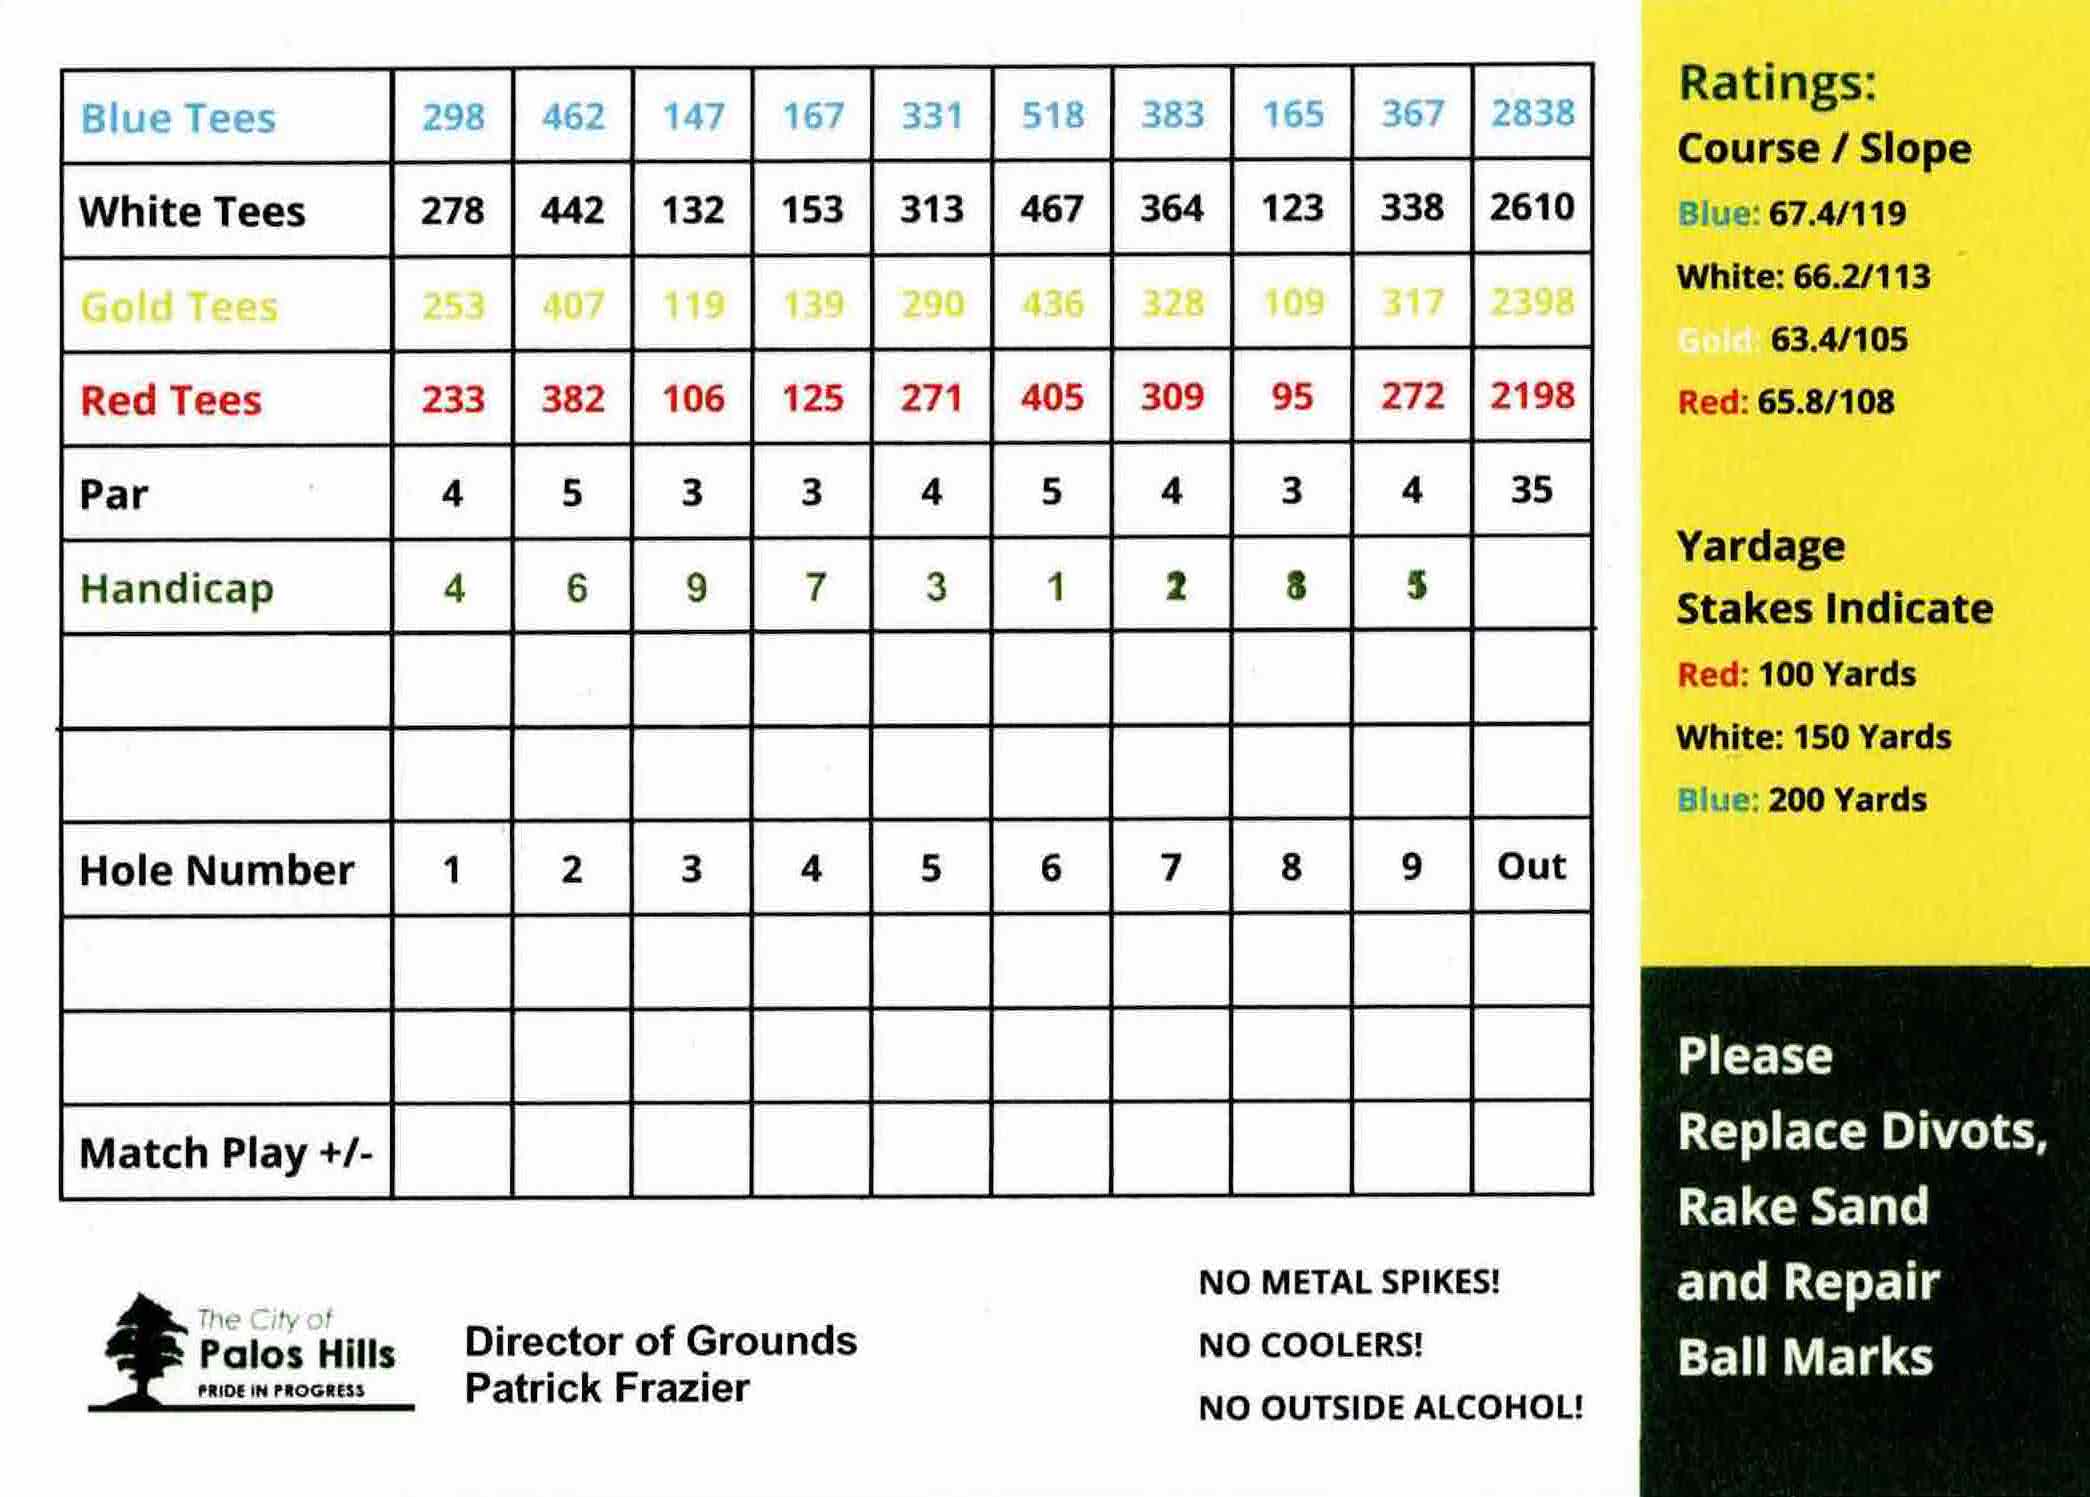 Scan of the scorecard from Palos Hills Golf Club in Palos Hills, Illinois. 